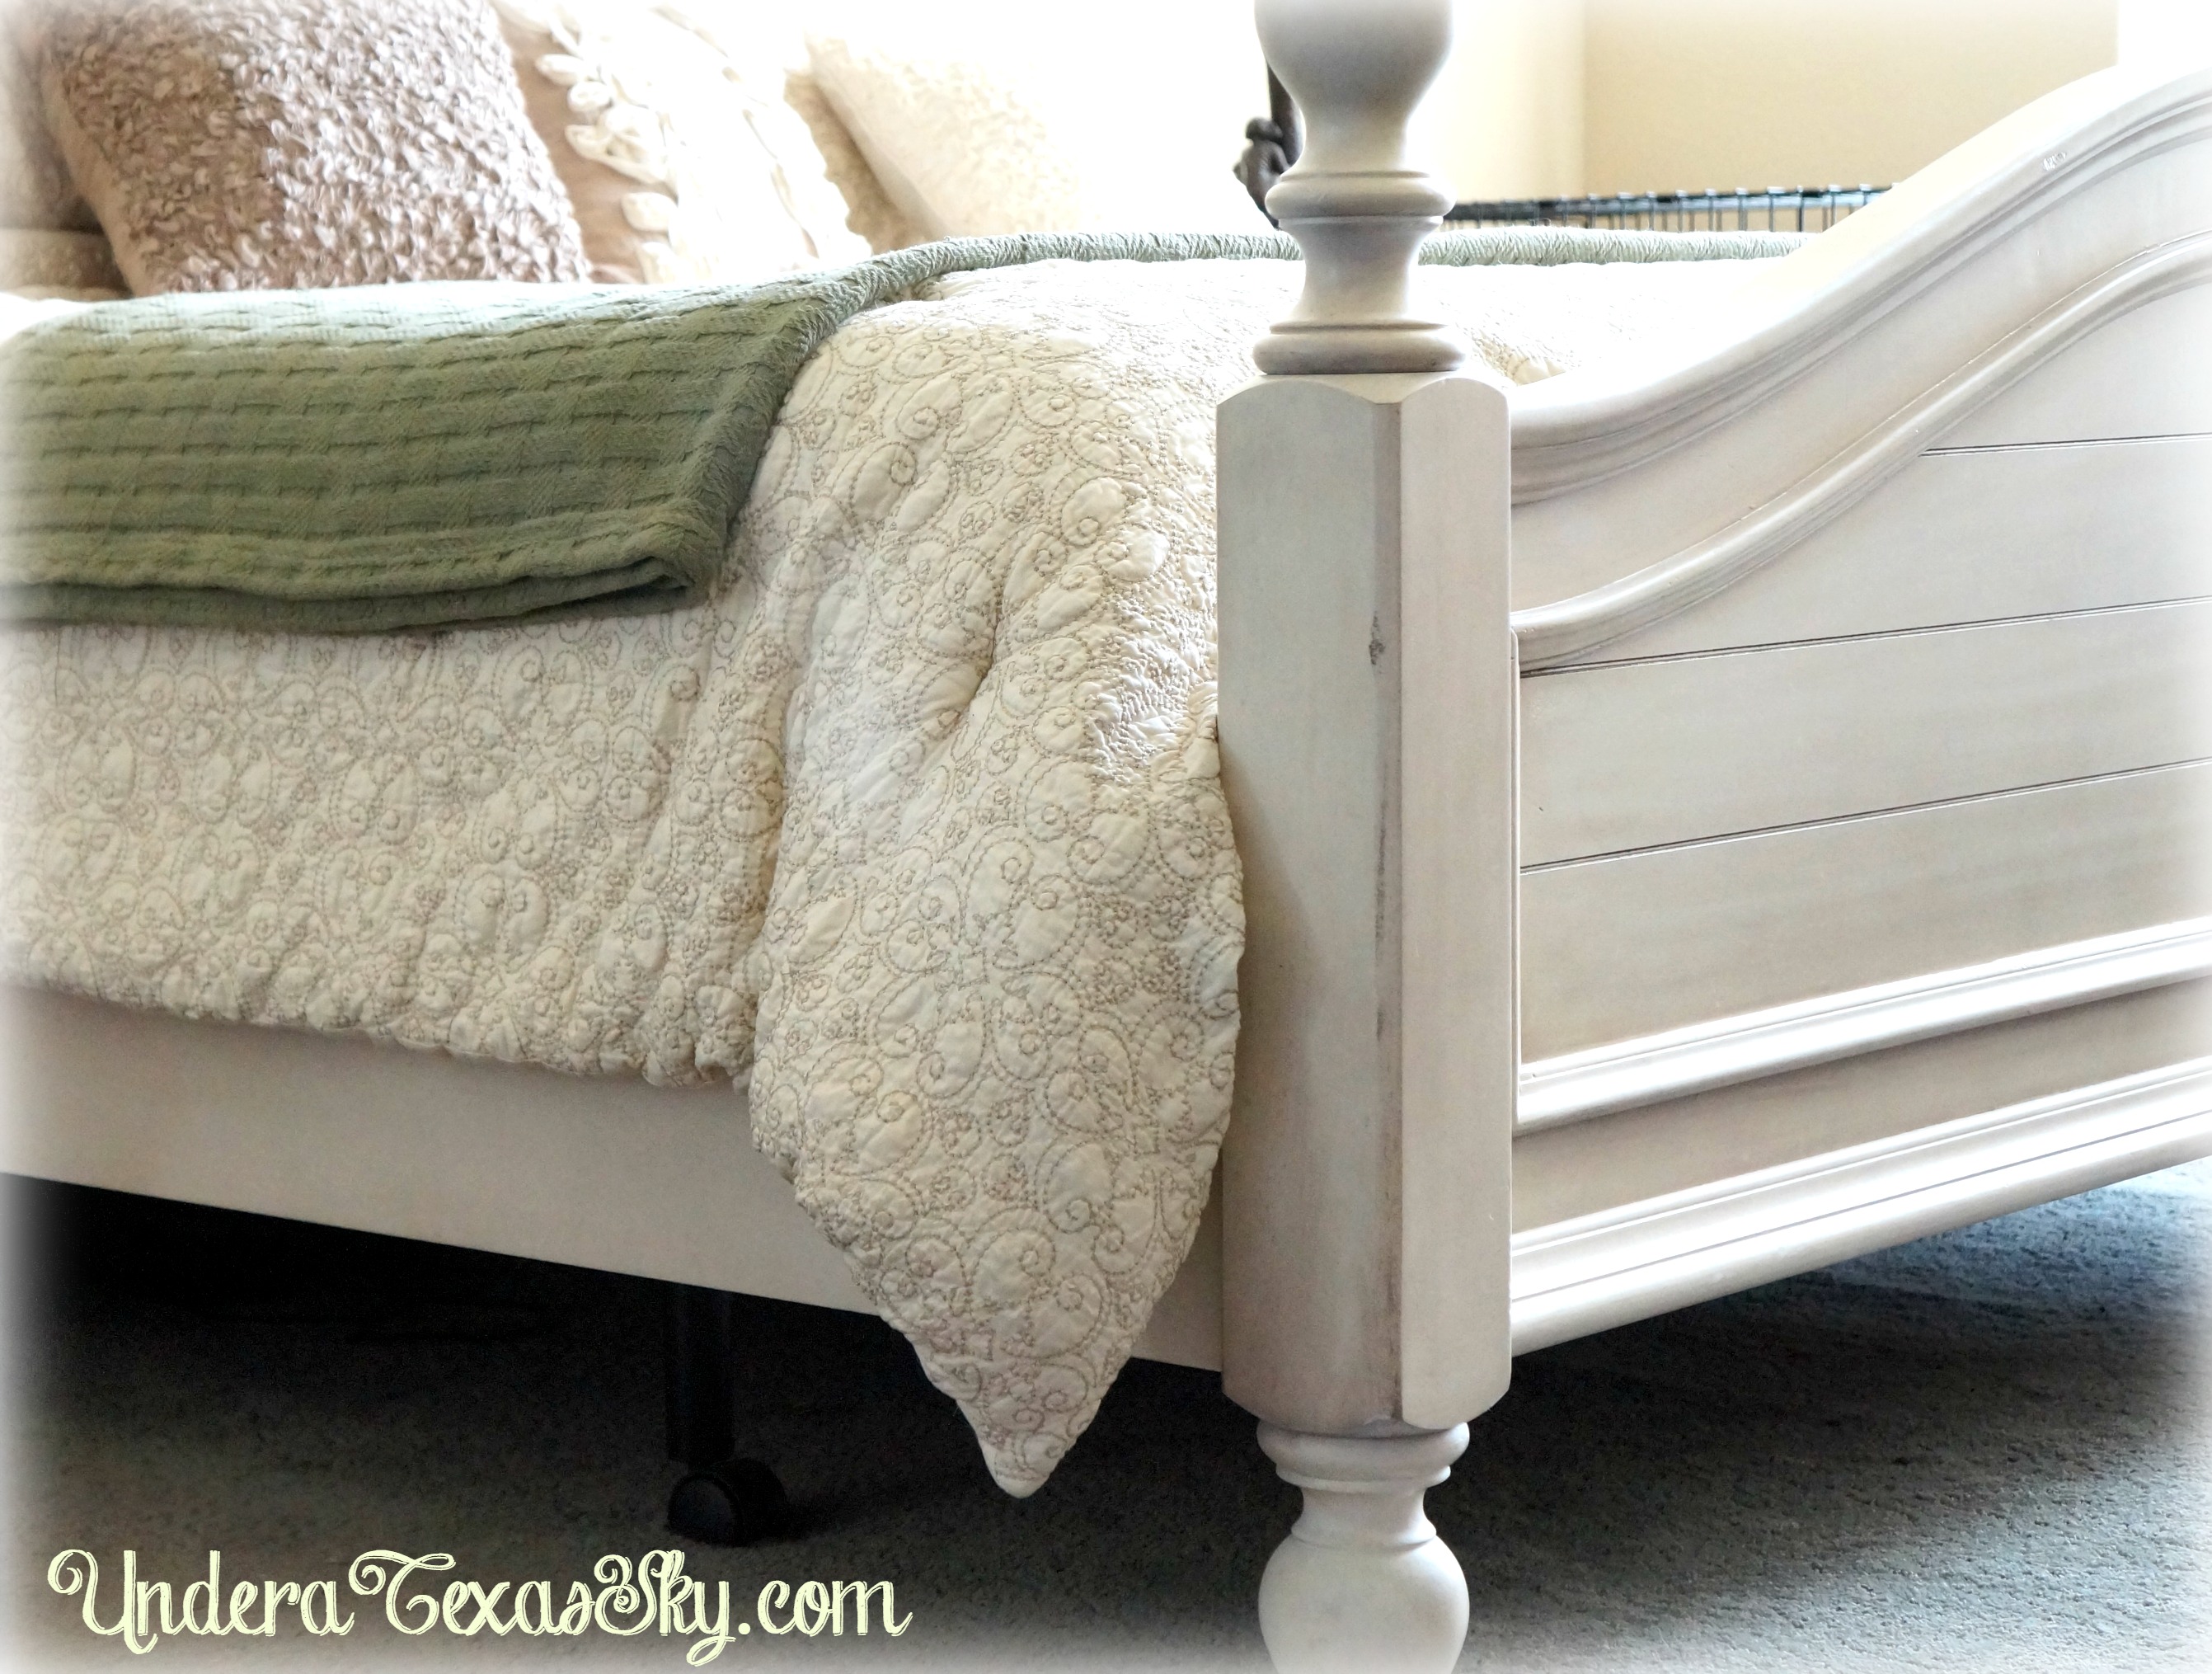 Using A Bedskirt With An Adjustable Bed, Can You Use A Dust Ruffle With An Adjustable Bed